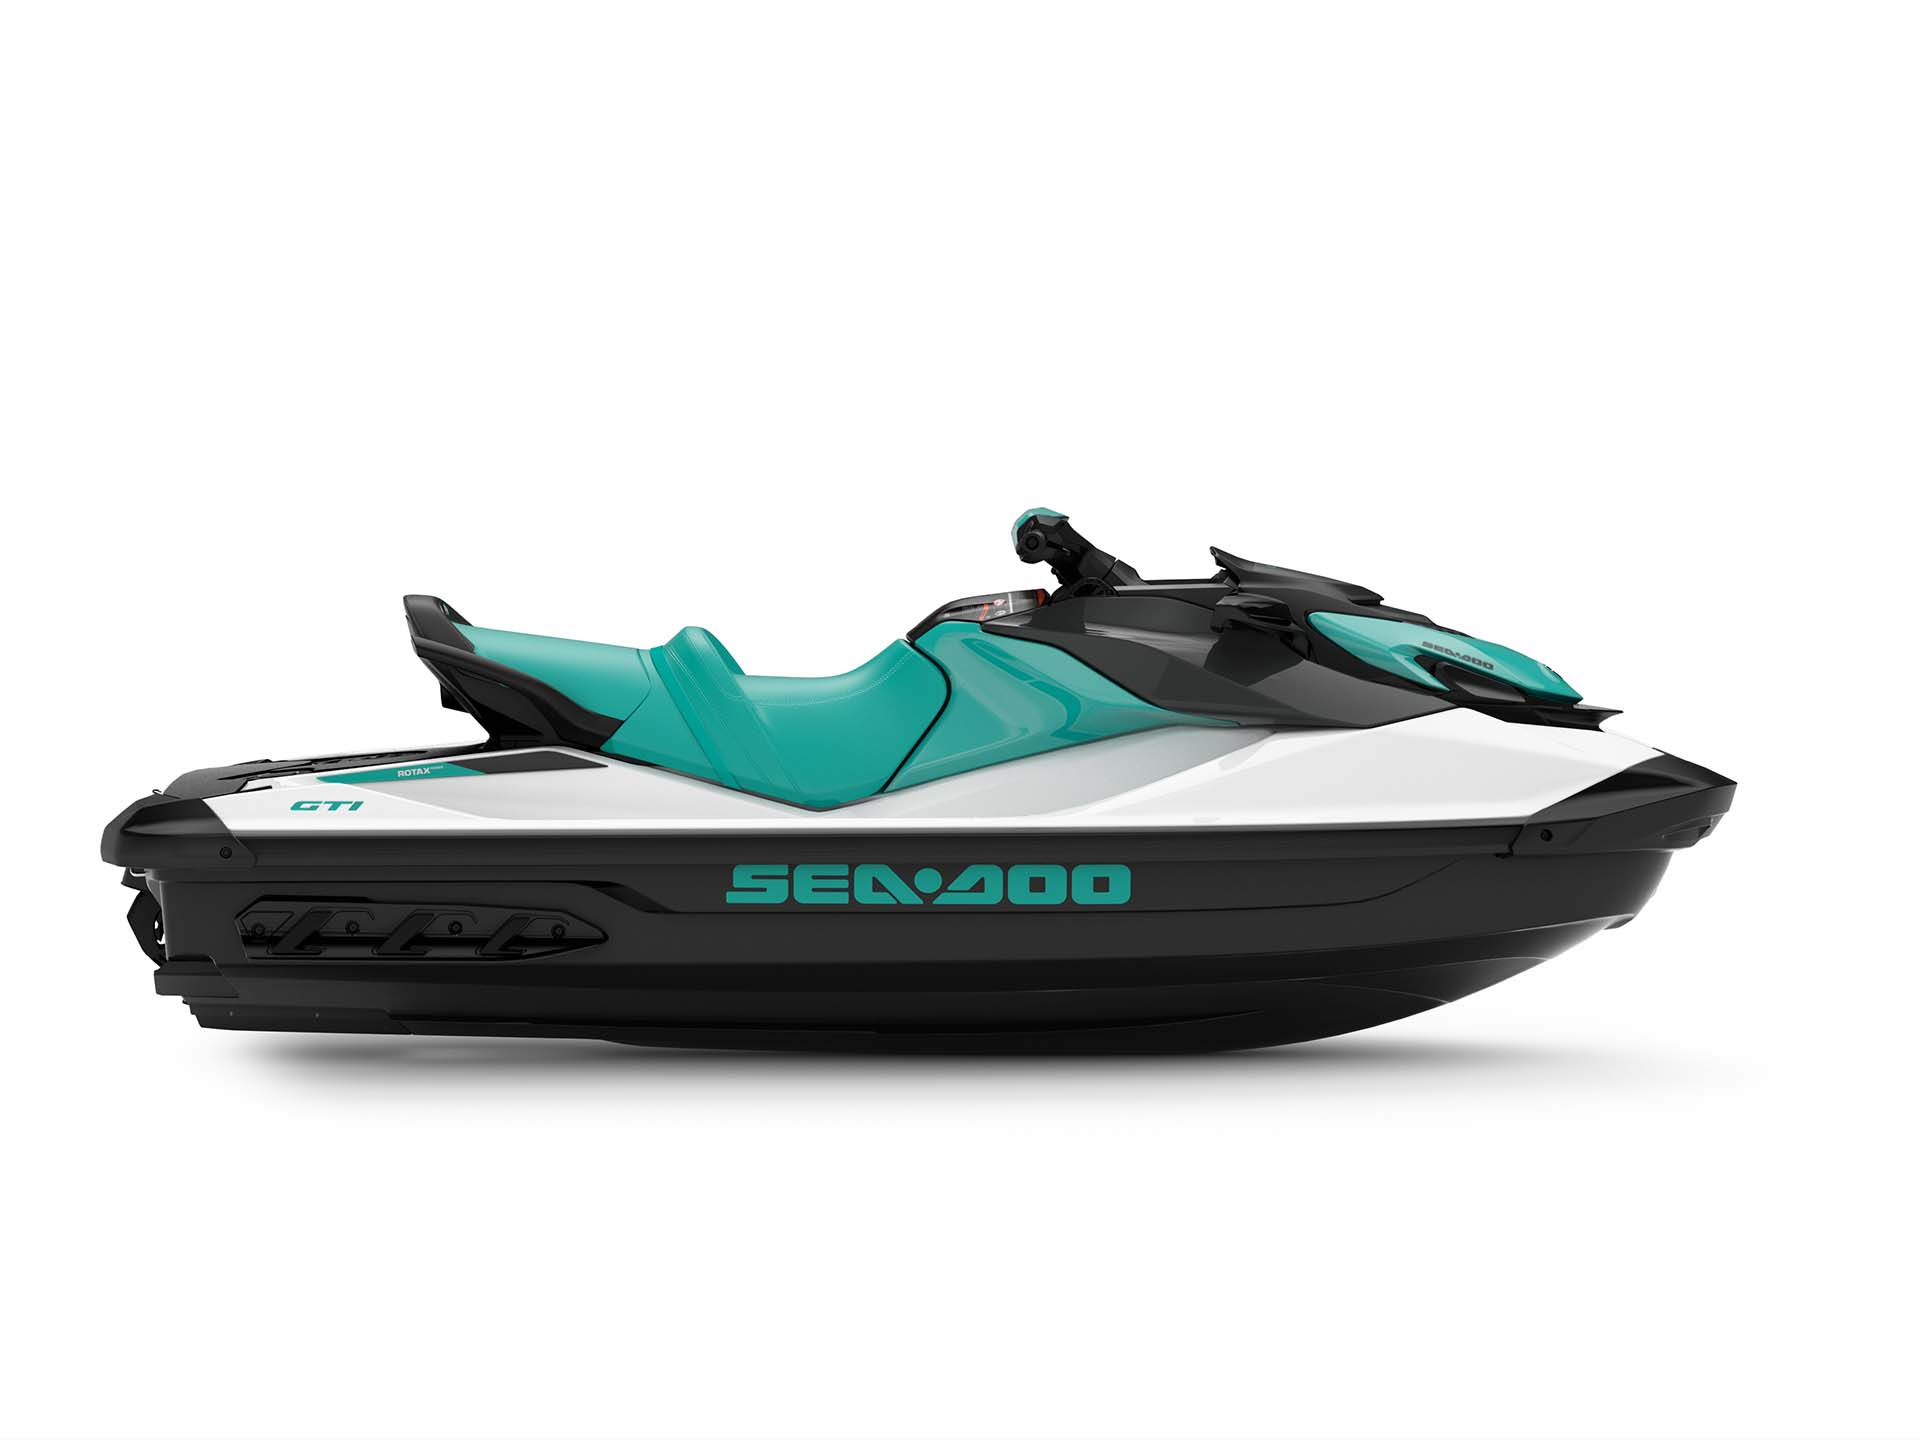 Discover the Sea-Doo lineup with Main Store (Parts, Sales, and 